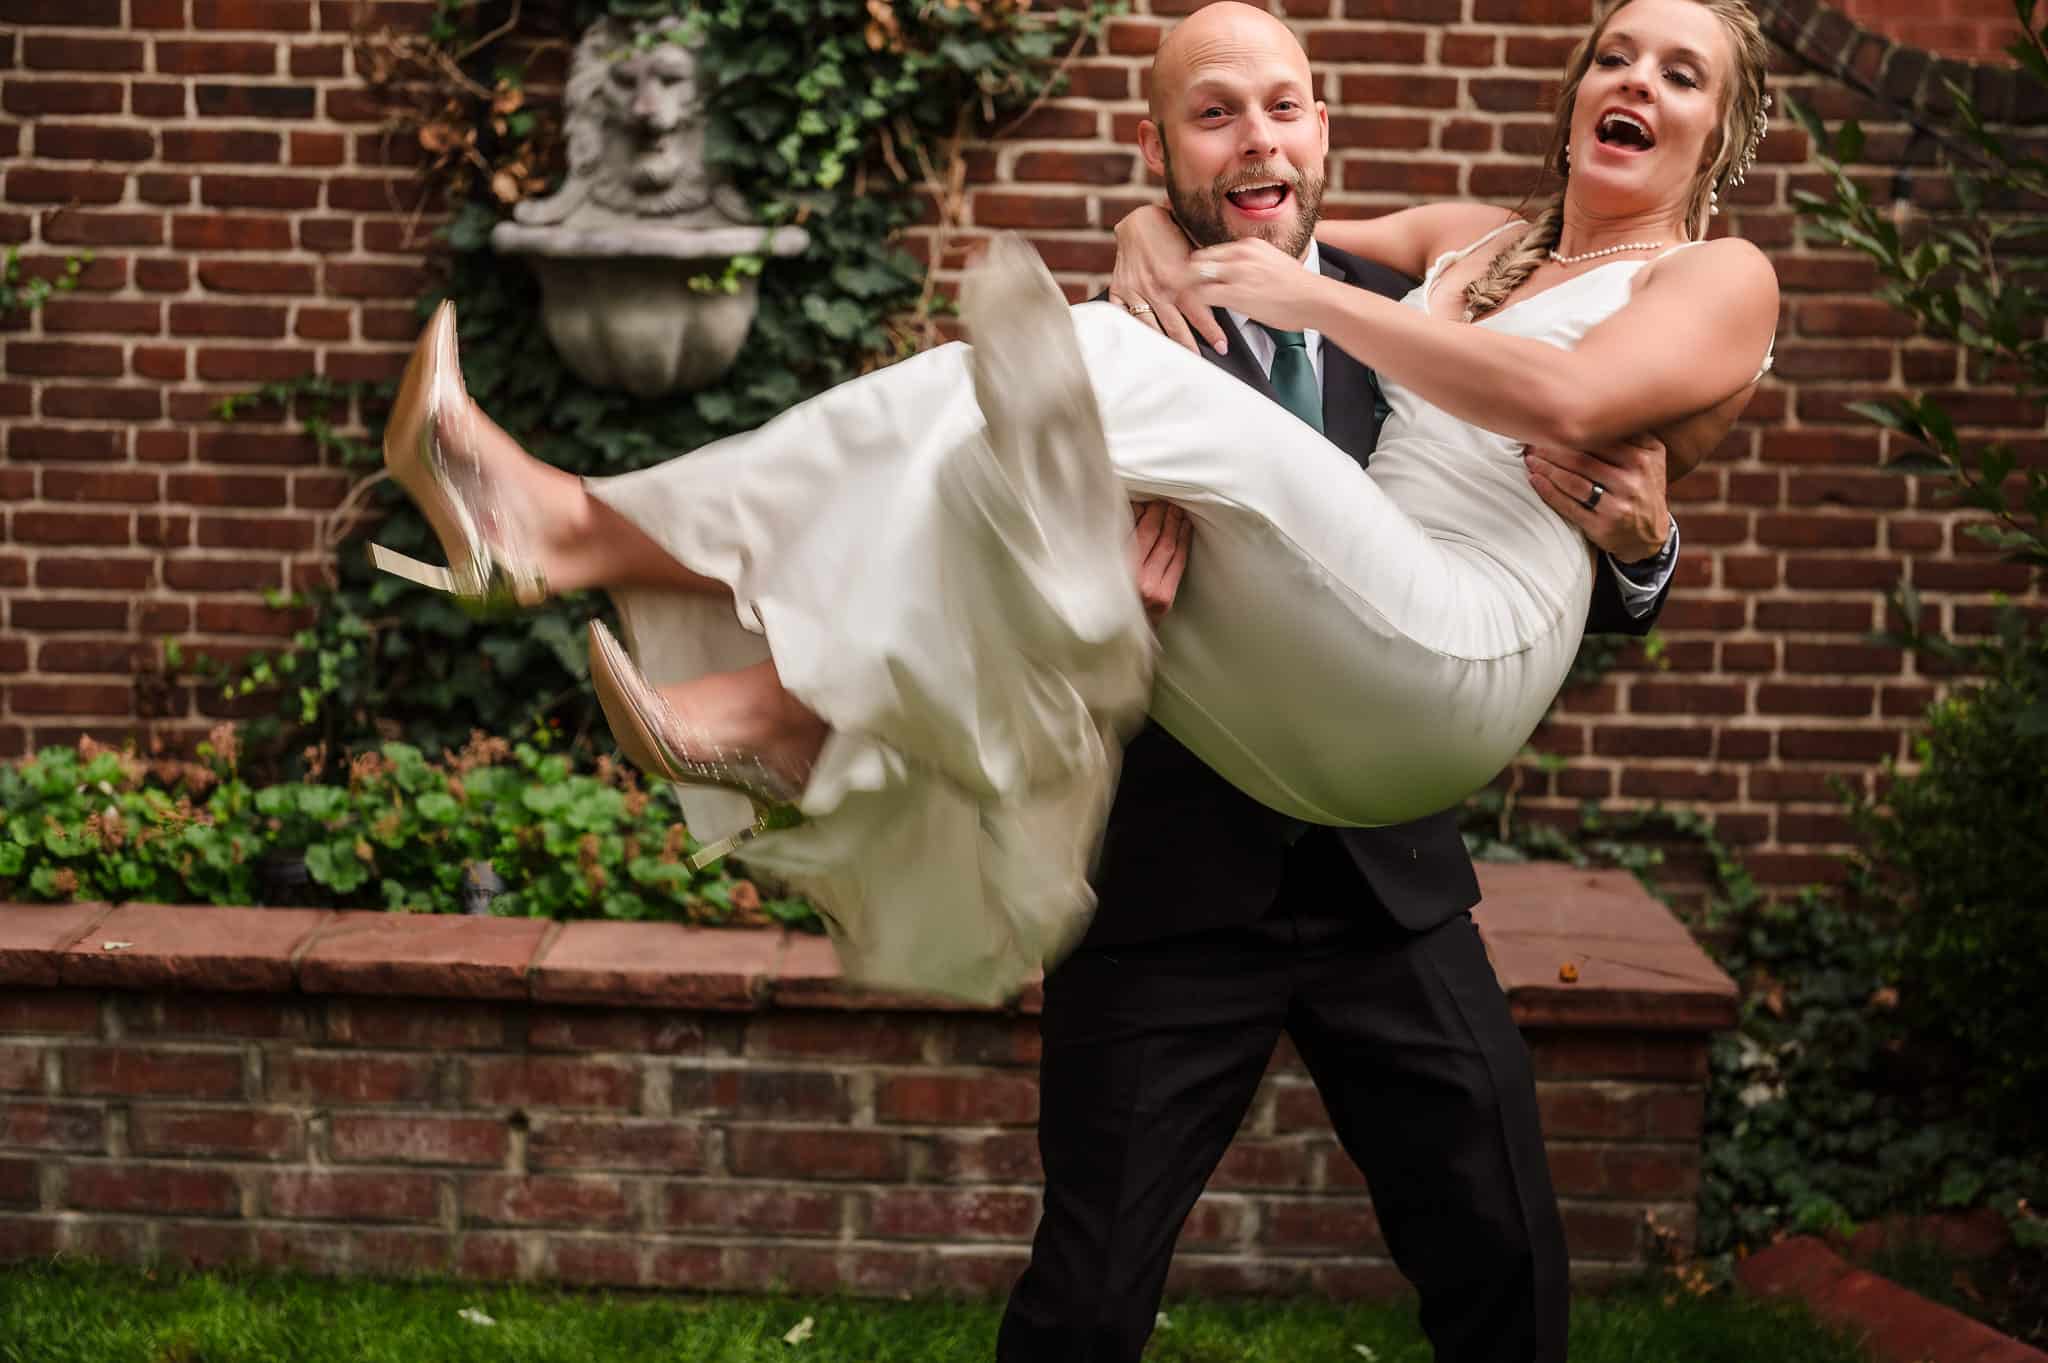 The twin brother of the bride playfully lifts her up in his arms and starts to carry her away.